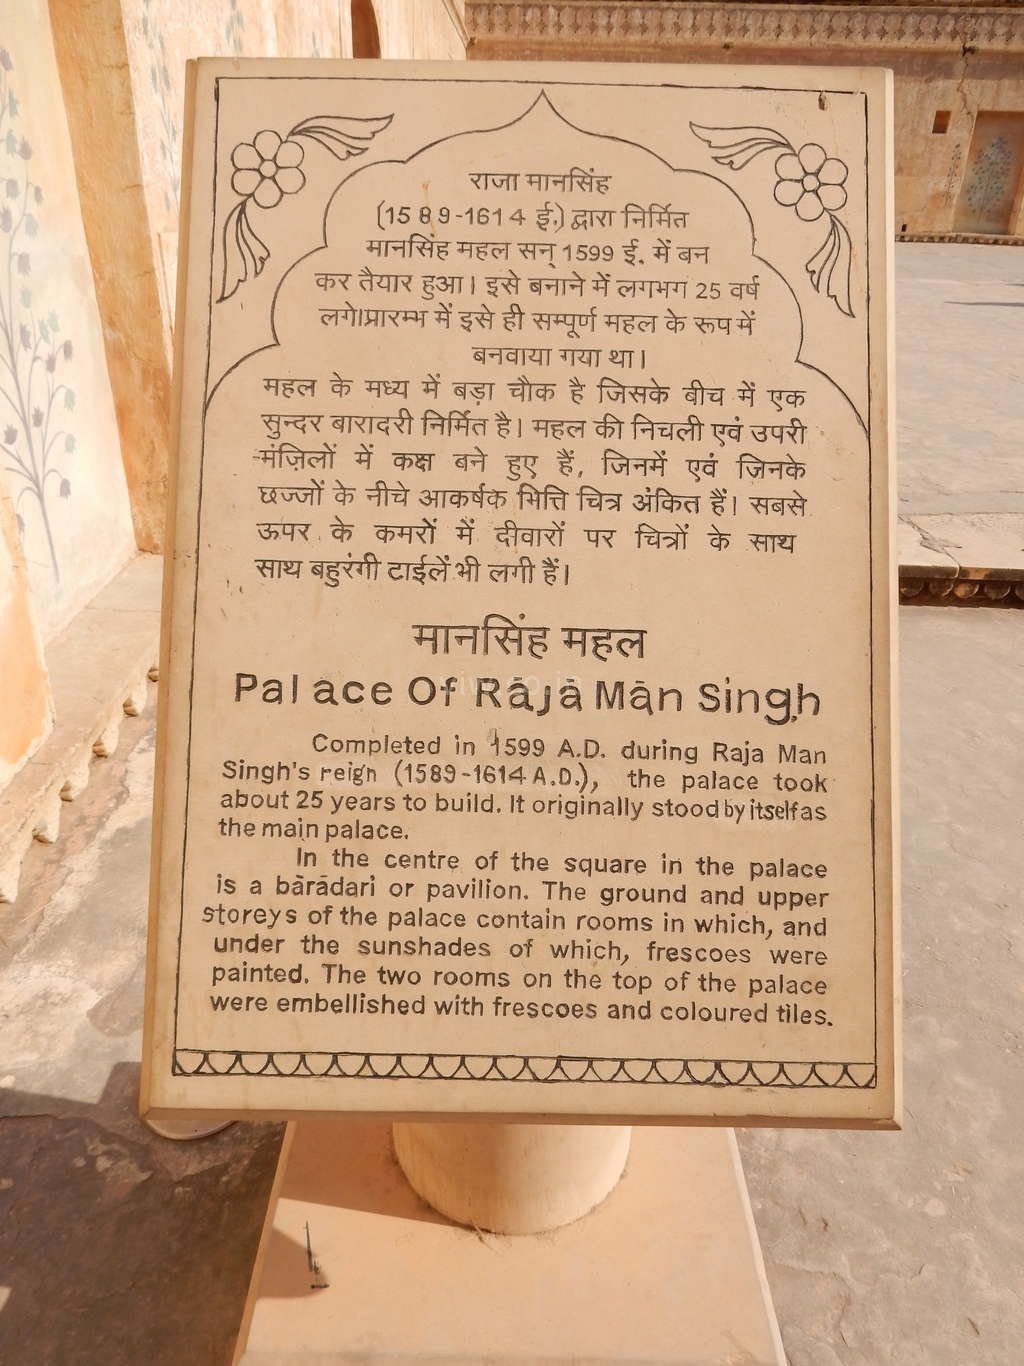 detailed information written on red marble about Raja Man singh palace